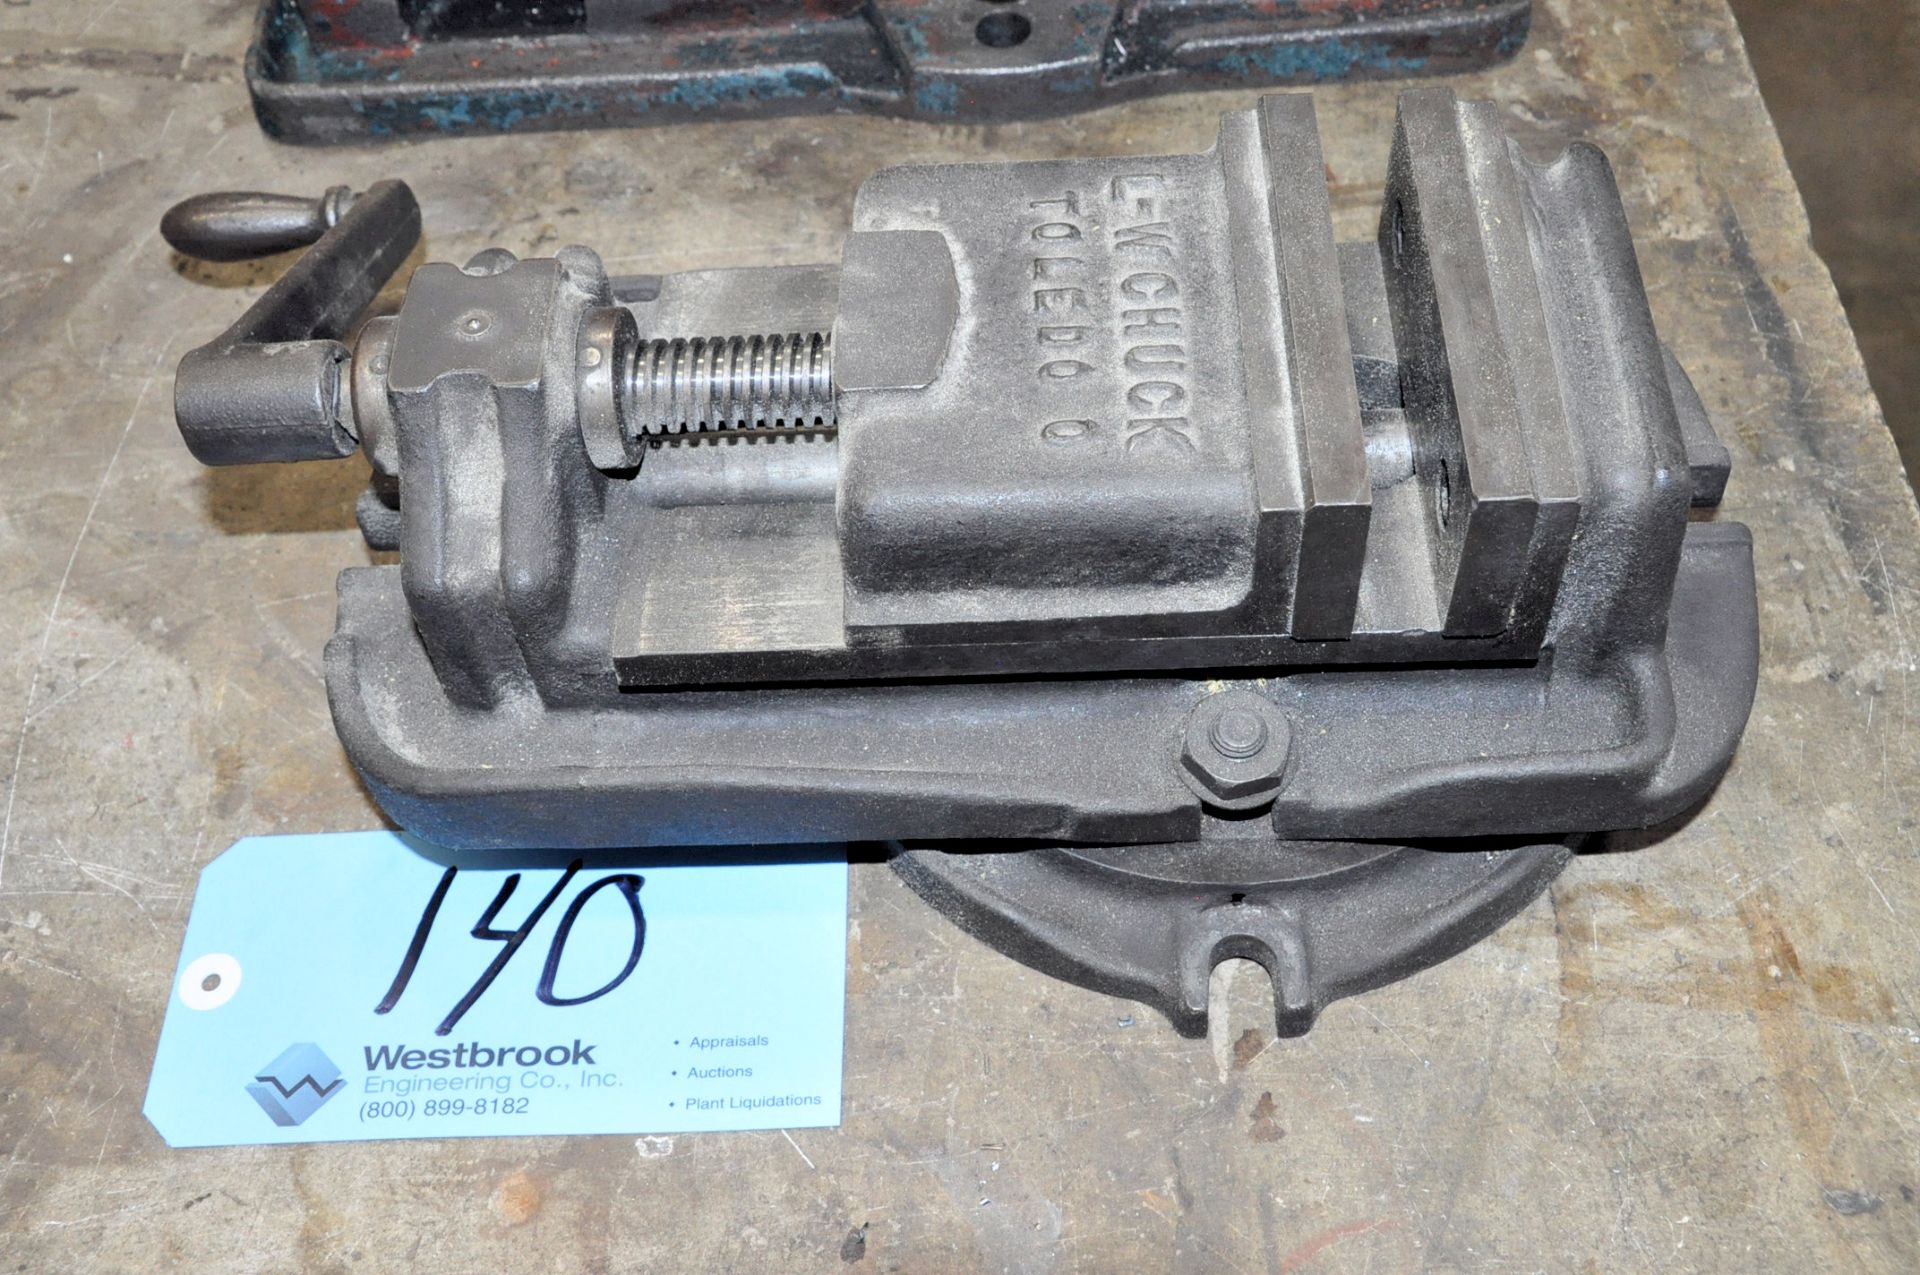 L.W. CHUCK 4-1/2" Machine Vise with Rotary Base